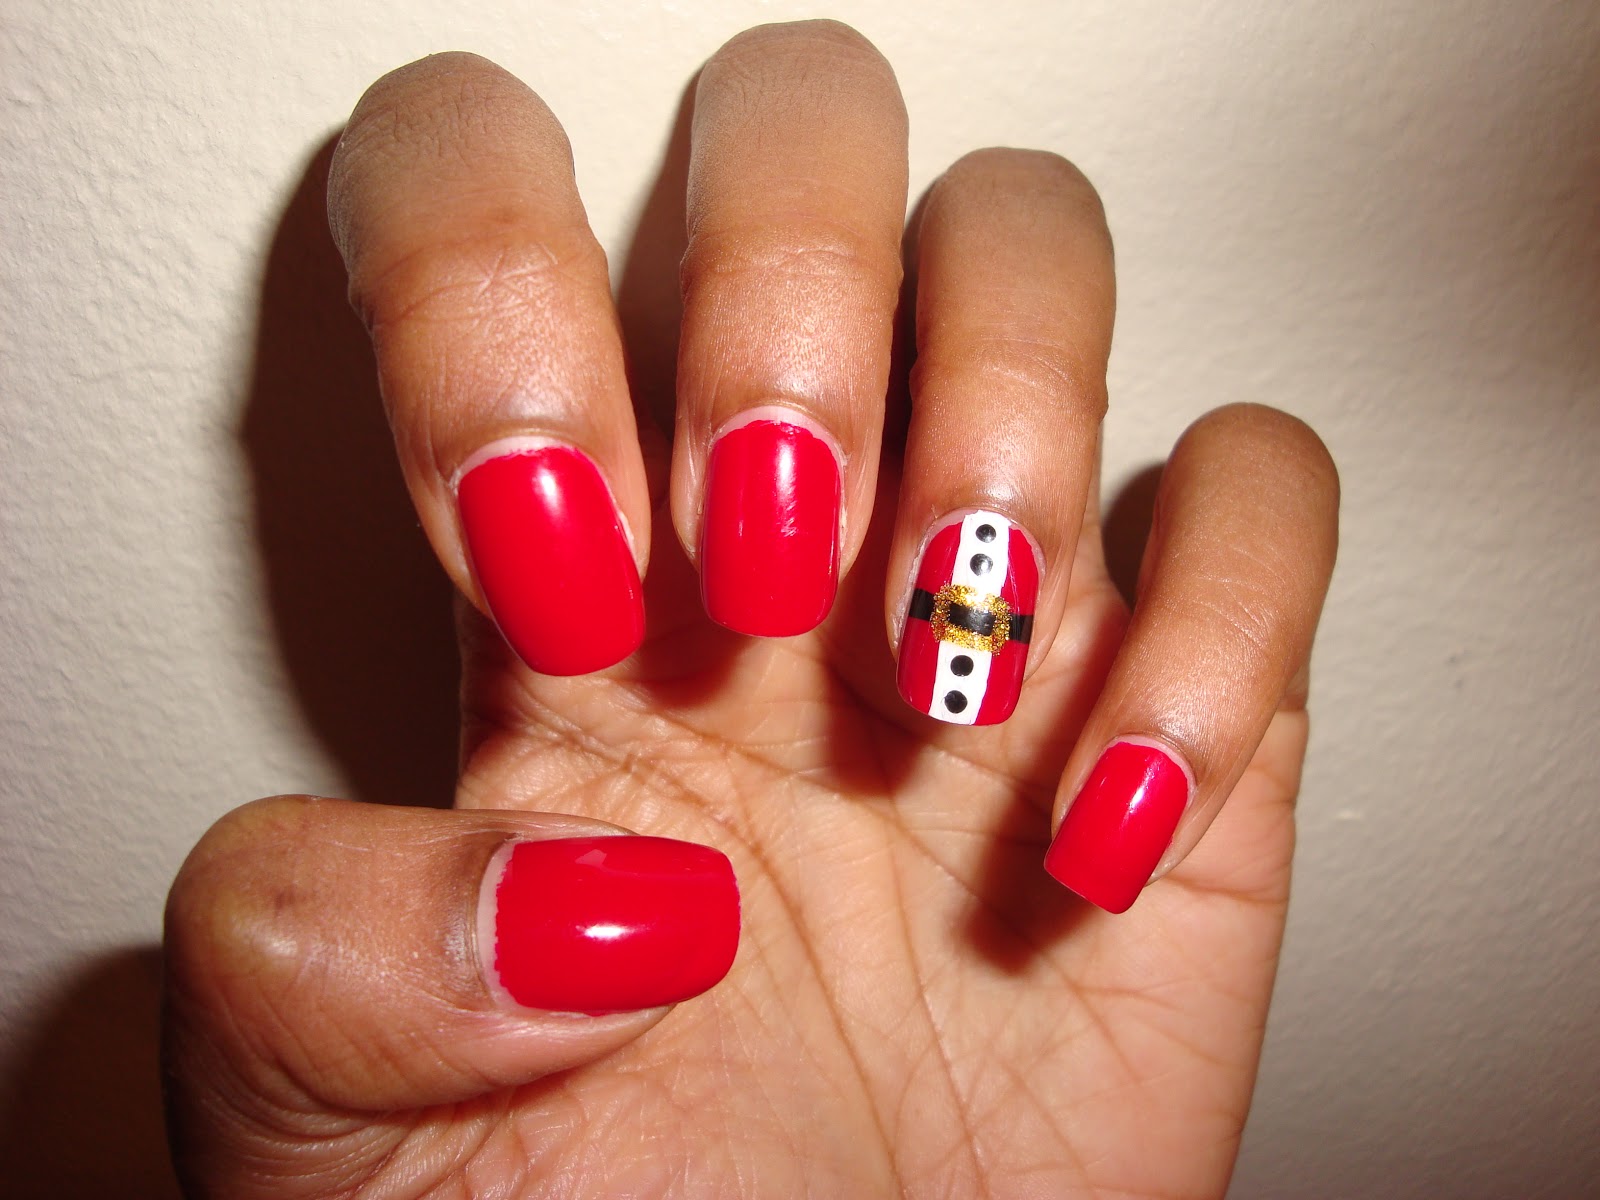 3. Cute Christmas Nail Designs for Short Nails - wide 8